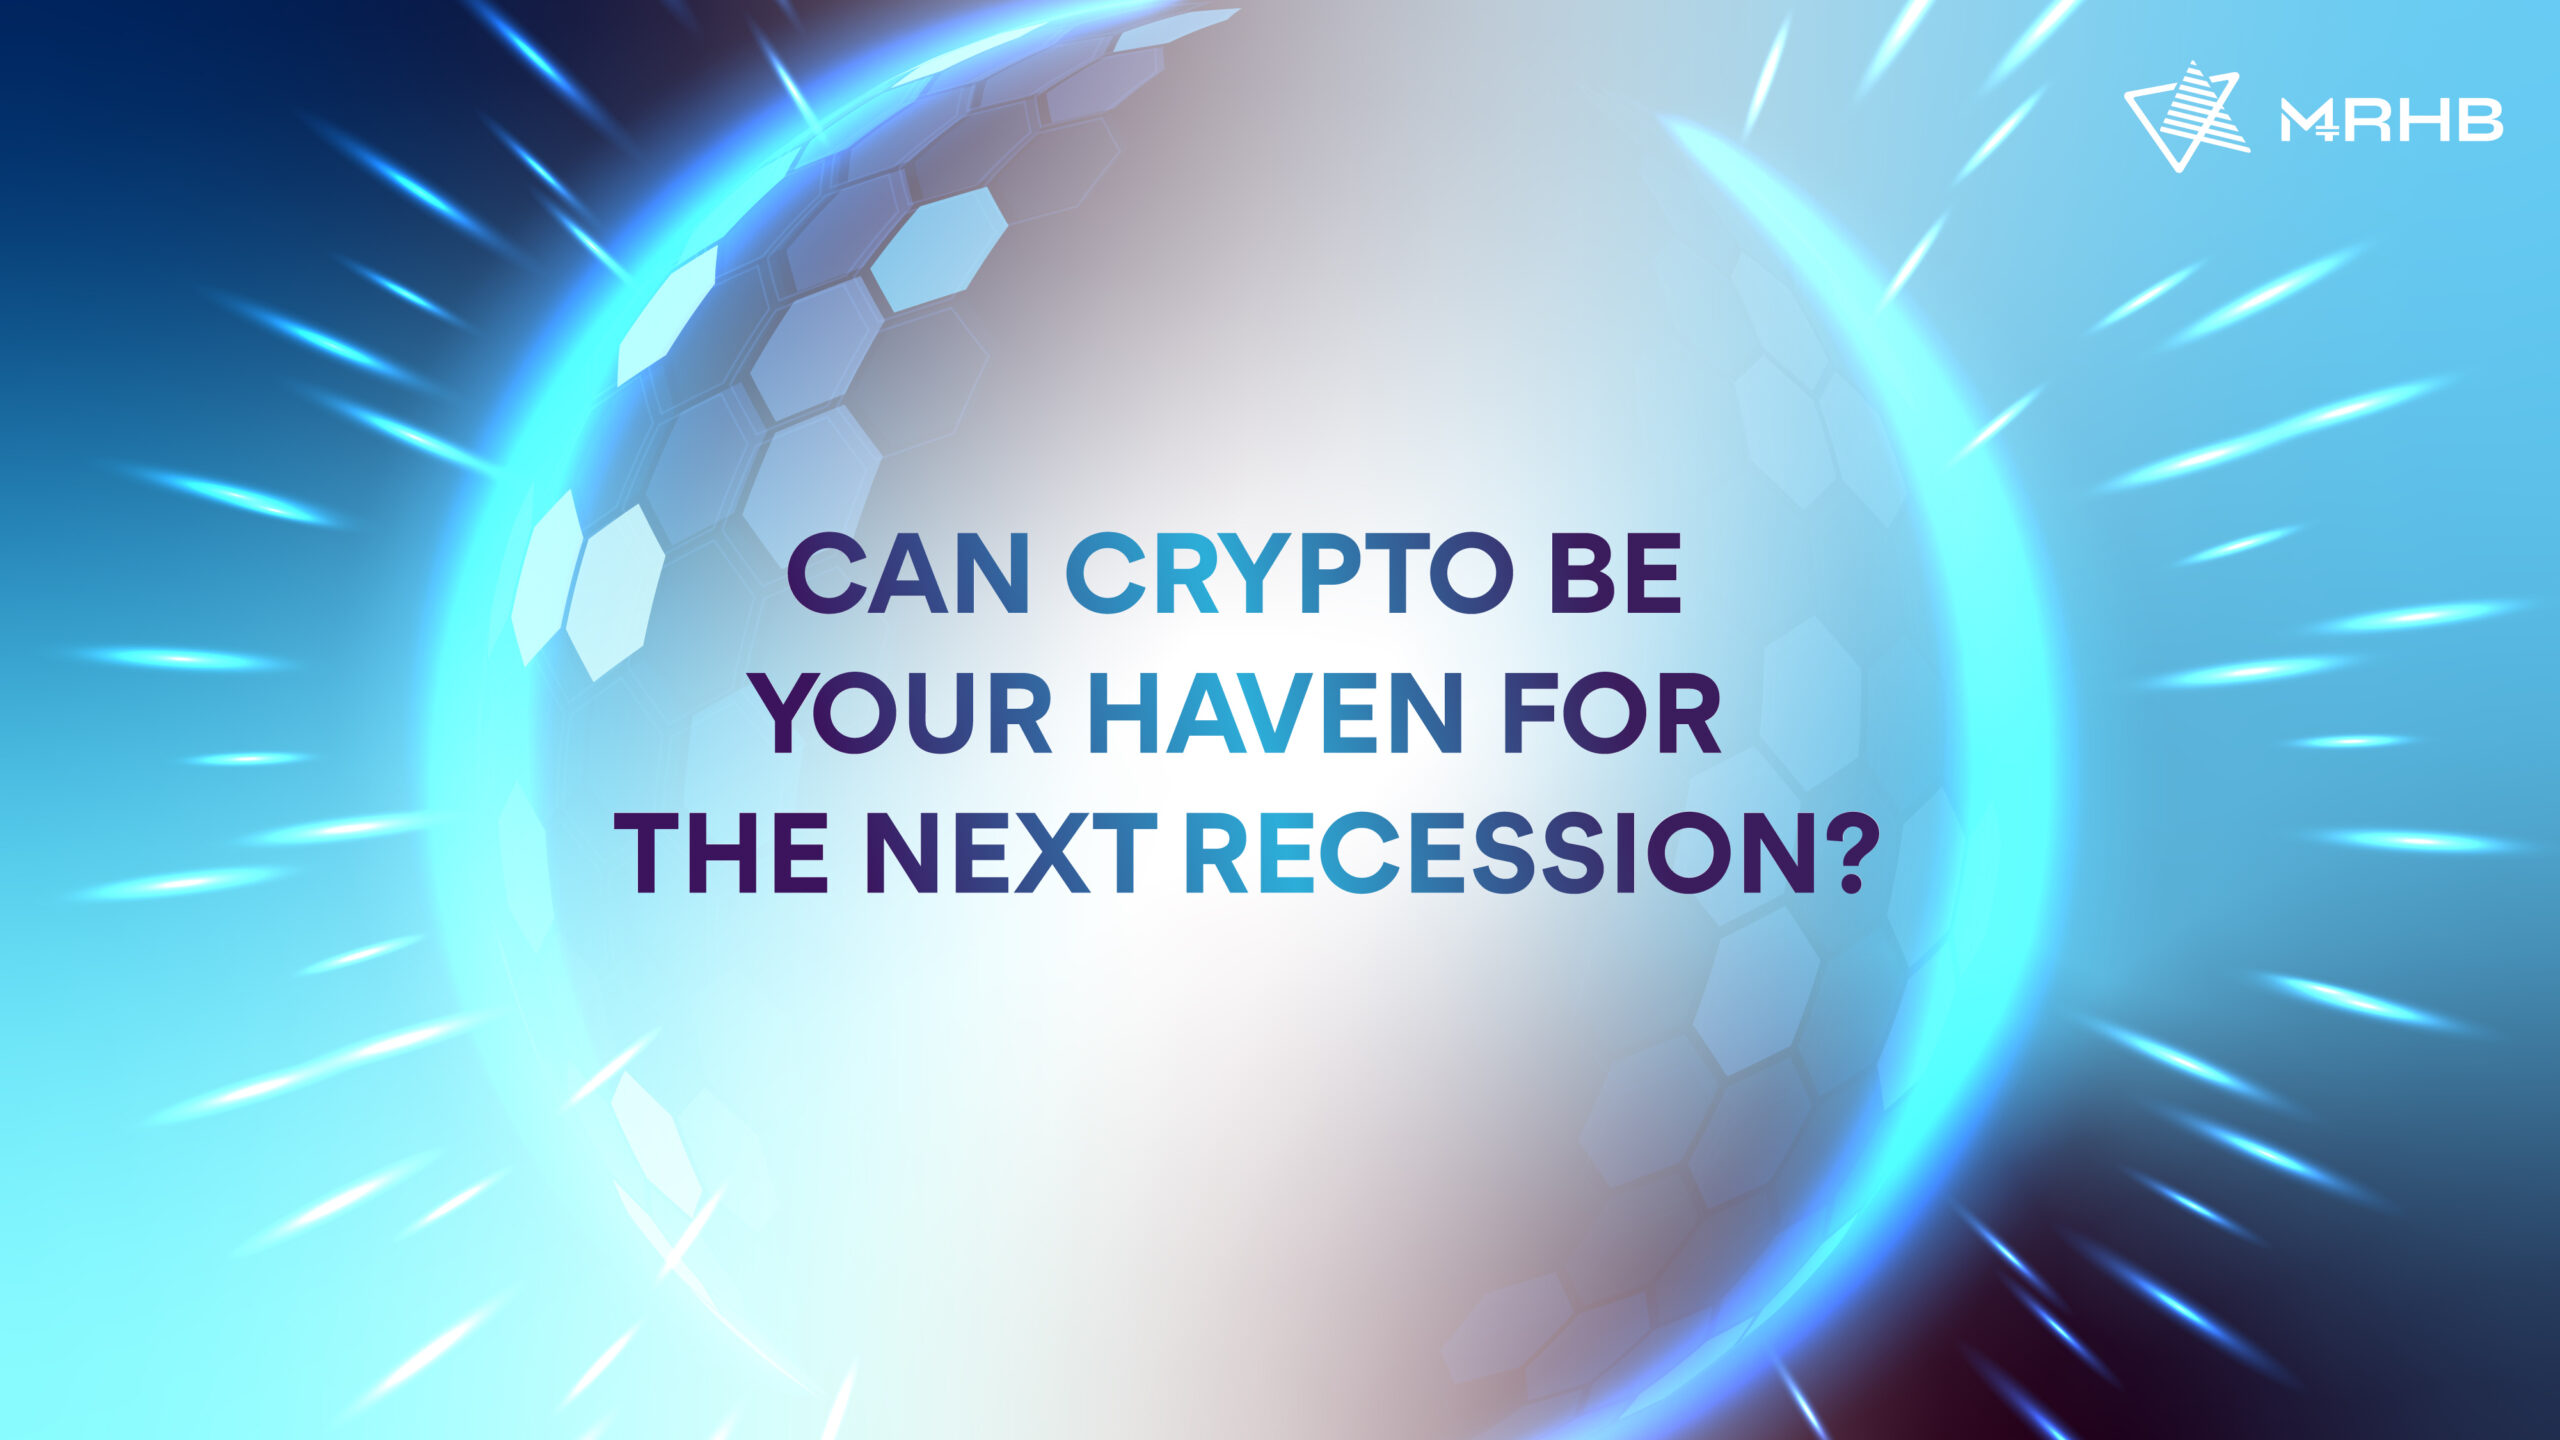 prepare next recession with crypto and gold as safe havens